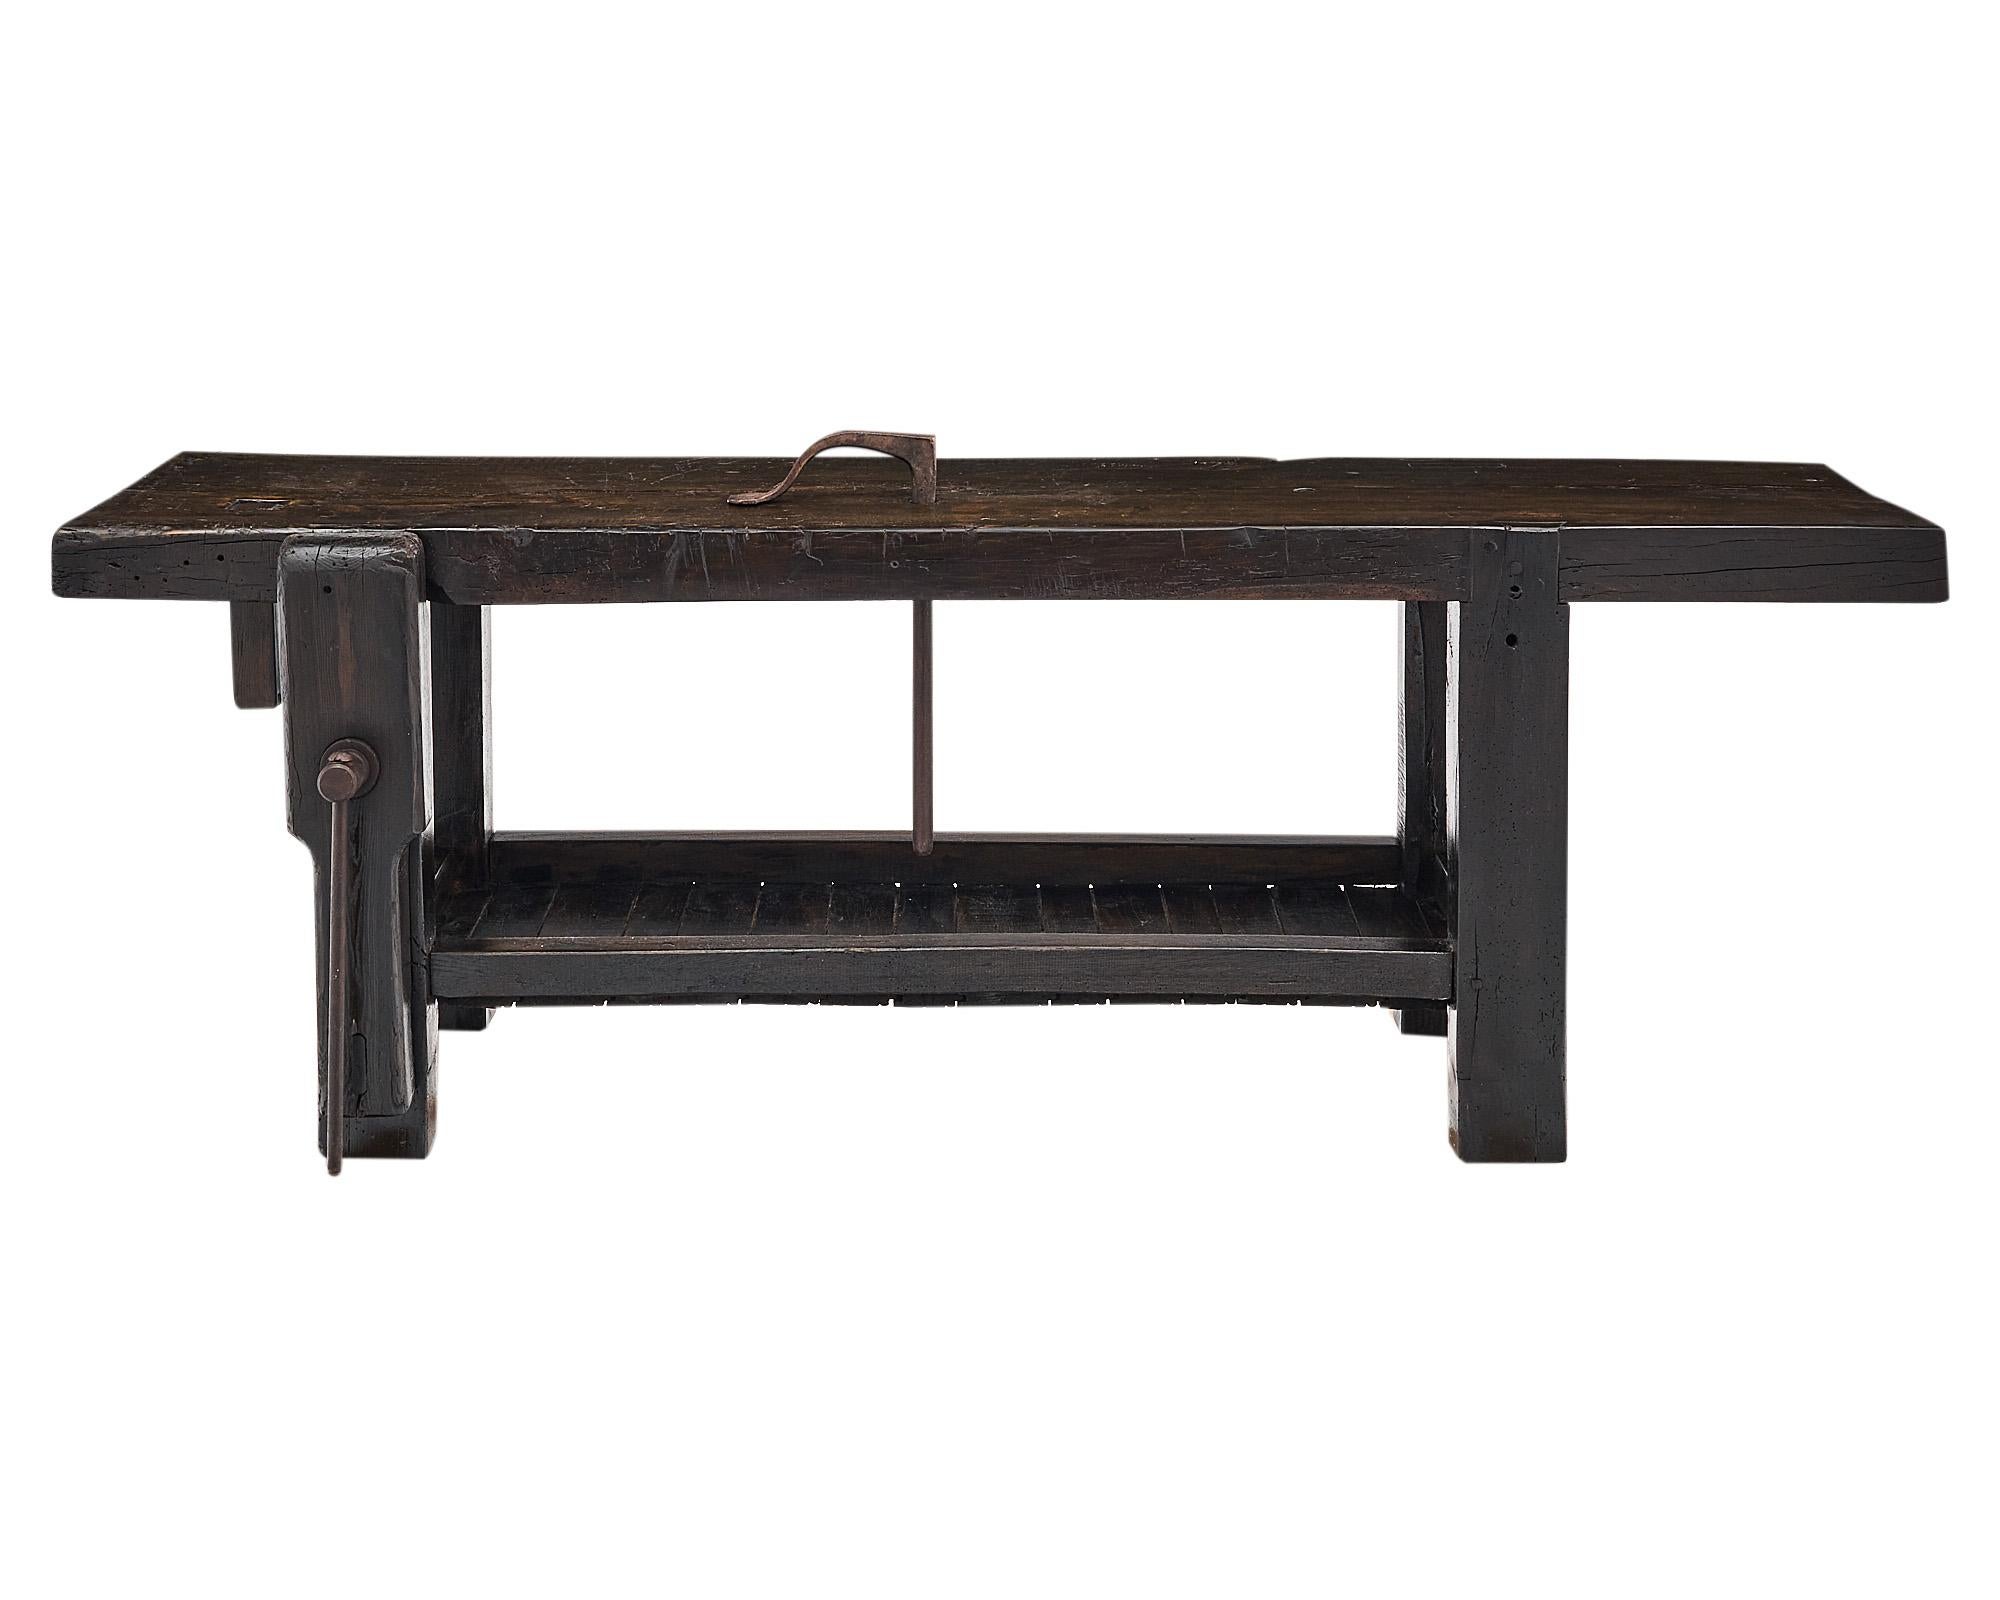 Workbench from the French Alps made of waxed and patinated chestnut wood. The bench features the original vise and clamp of forged iron as well as a bottom planked shelf. The depth listed is for the full depth including the vise, the depth of the